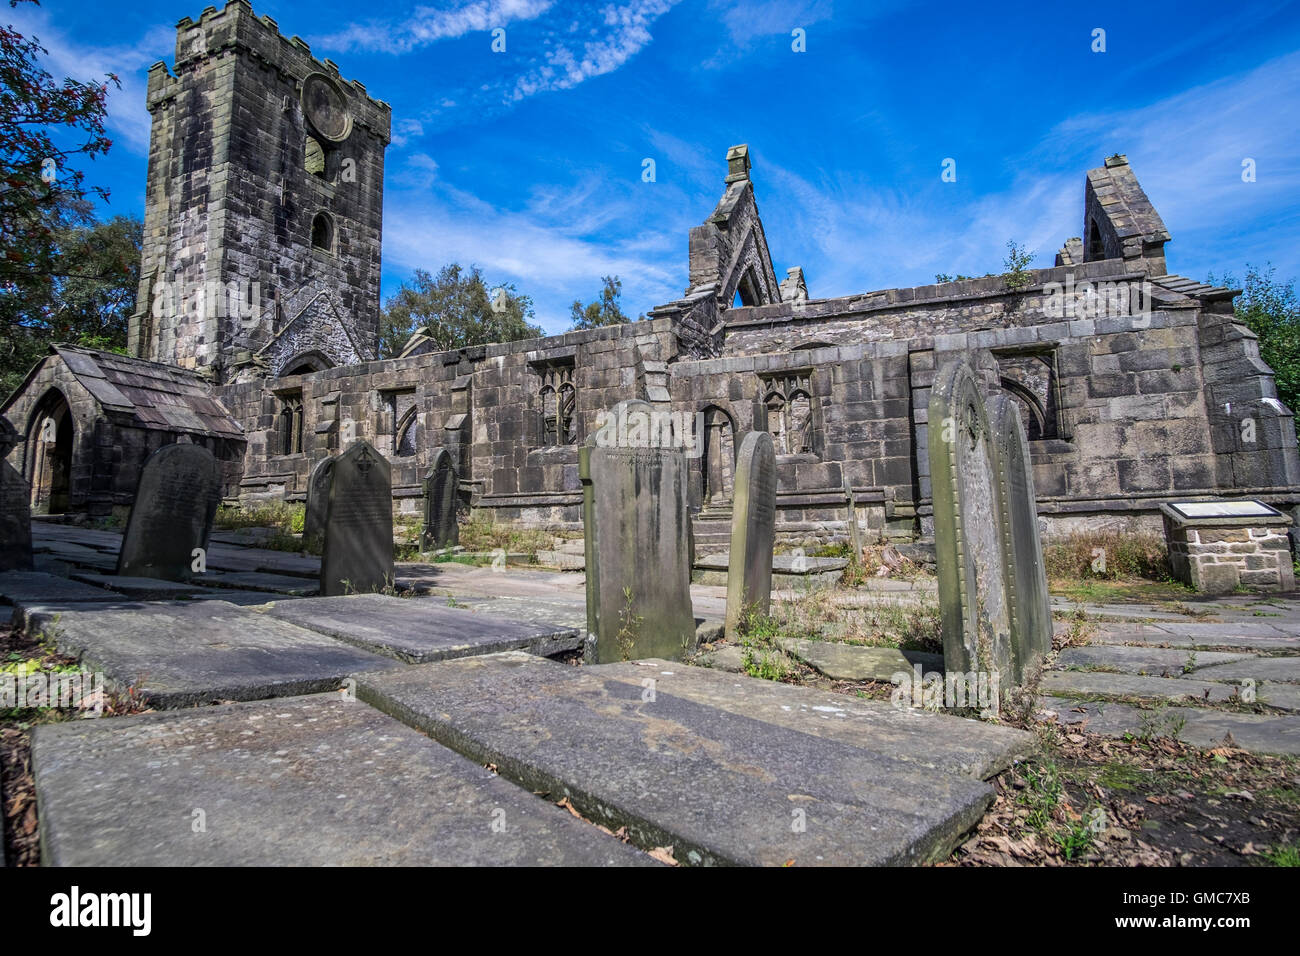 The church at Heptenstall was dedicated to St Thomas a Becket and was built between 1256 and 1260. Stock Photo